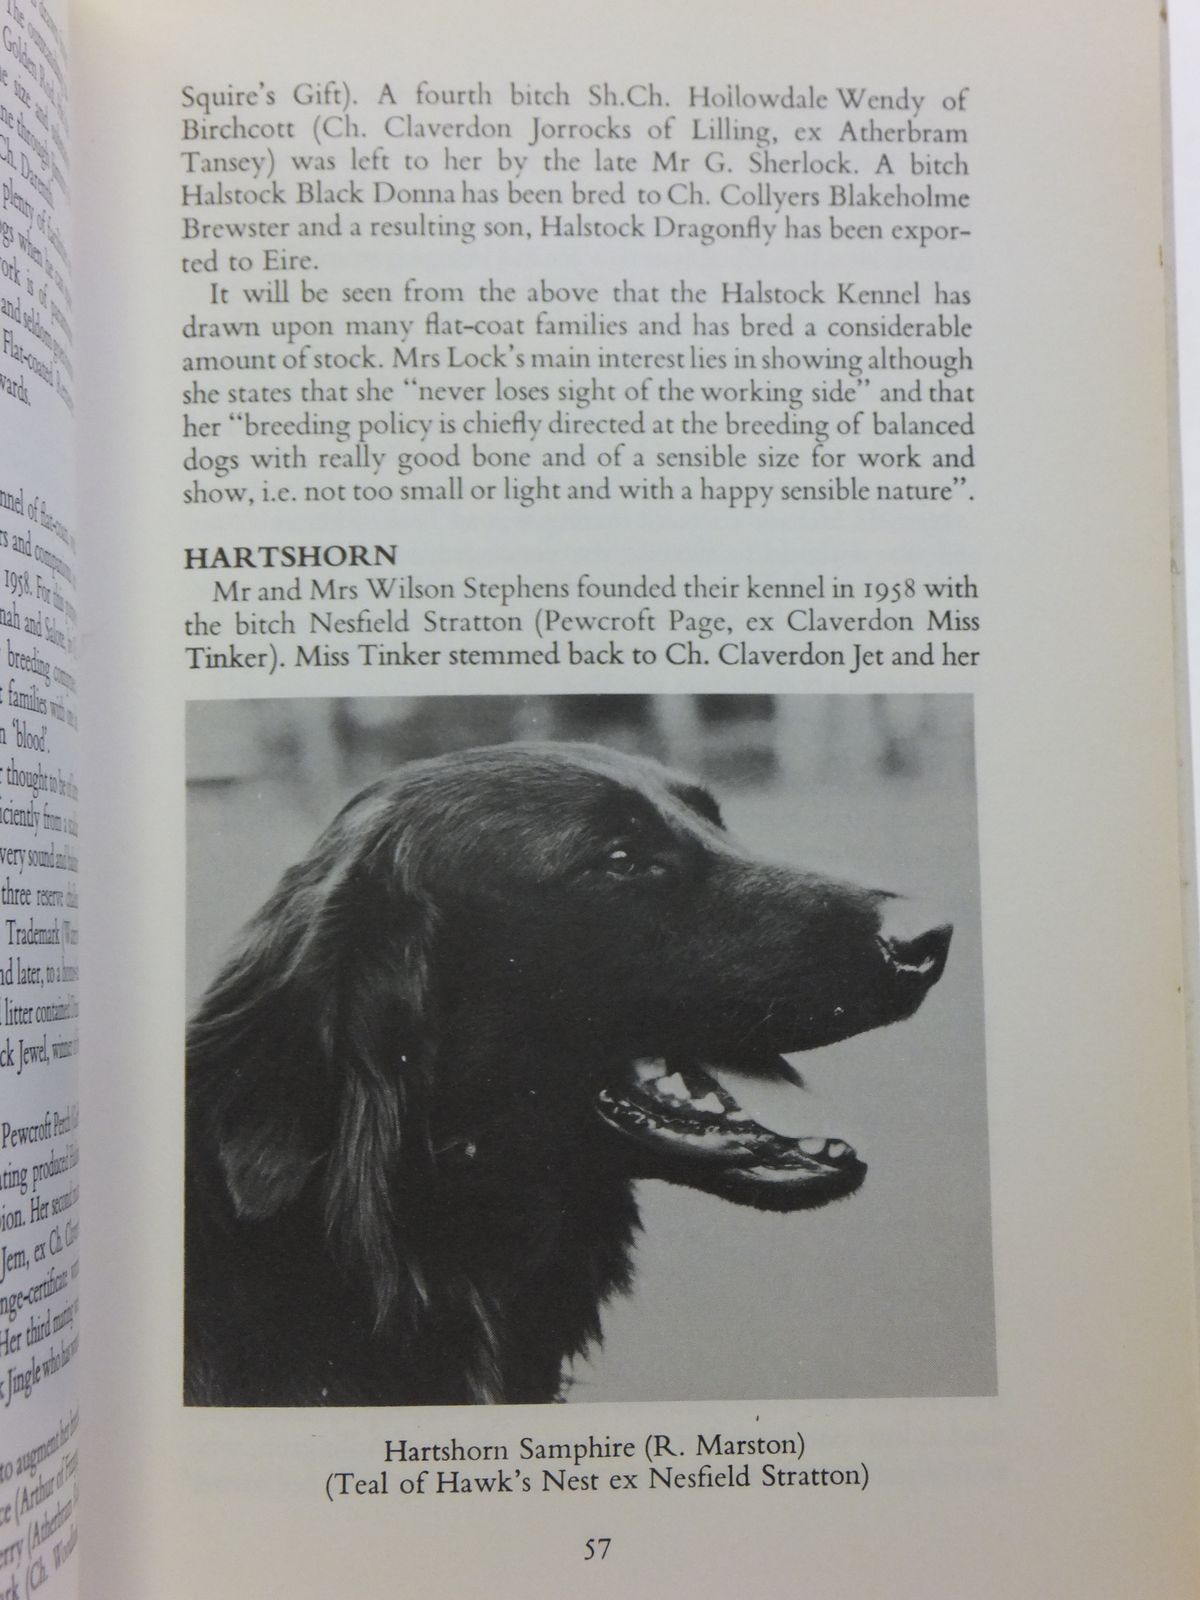 Photo of A REVIEW OF THE FLAT-COATED RETRIEVER written by Laughton, Nancy published by Pelham Books (STOCK CODE: 2111646)  for sale by Stella & Rose's Books